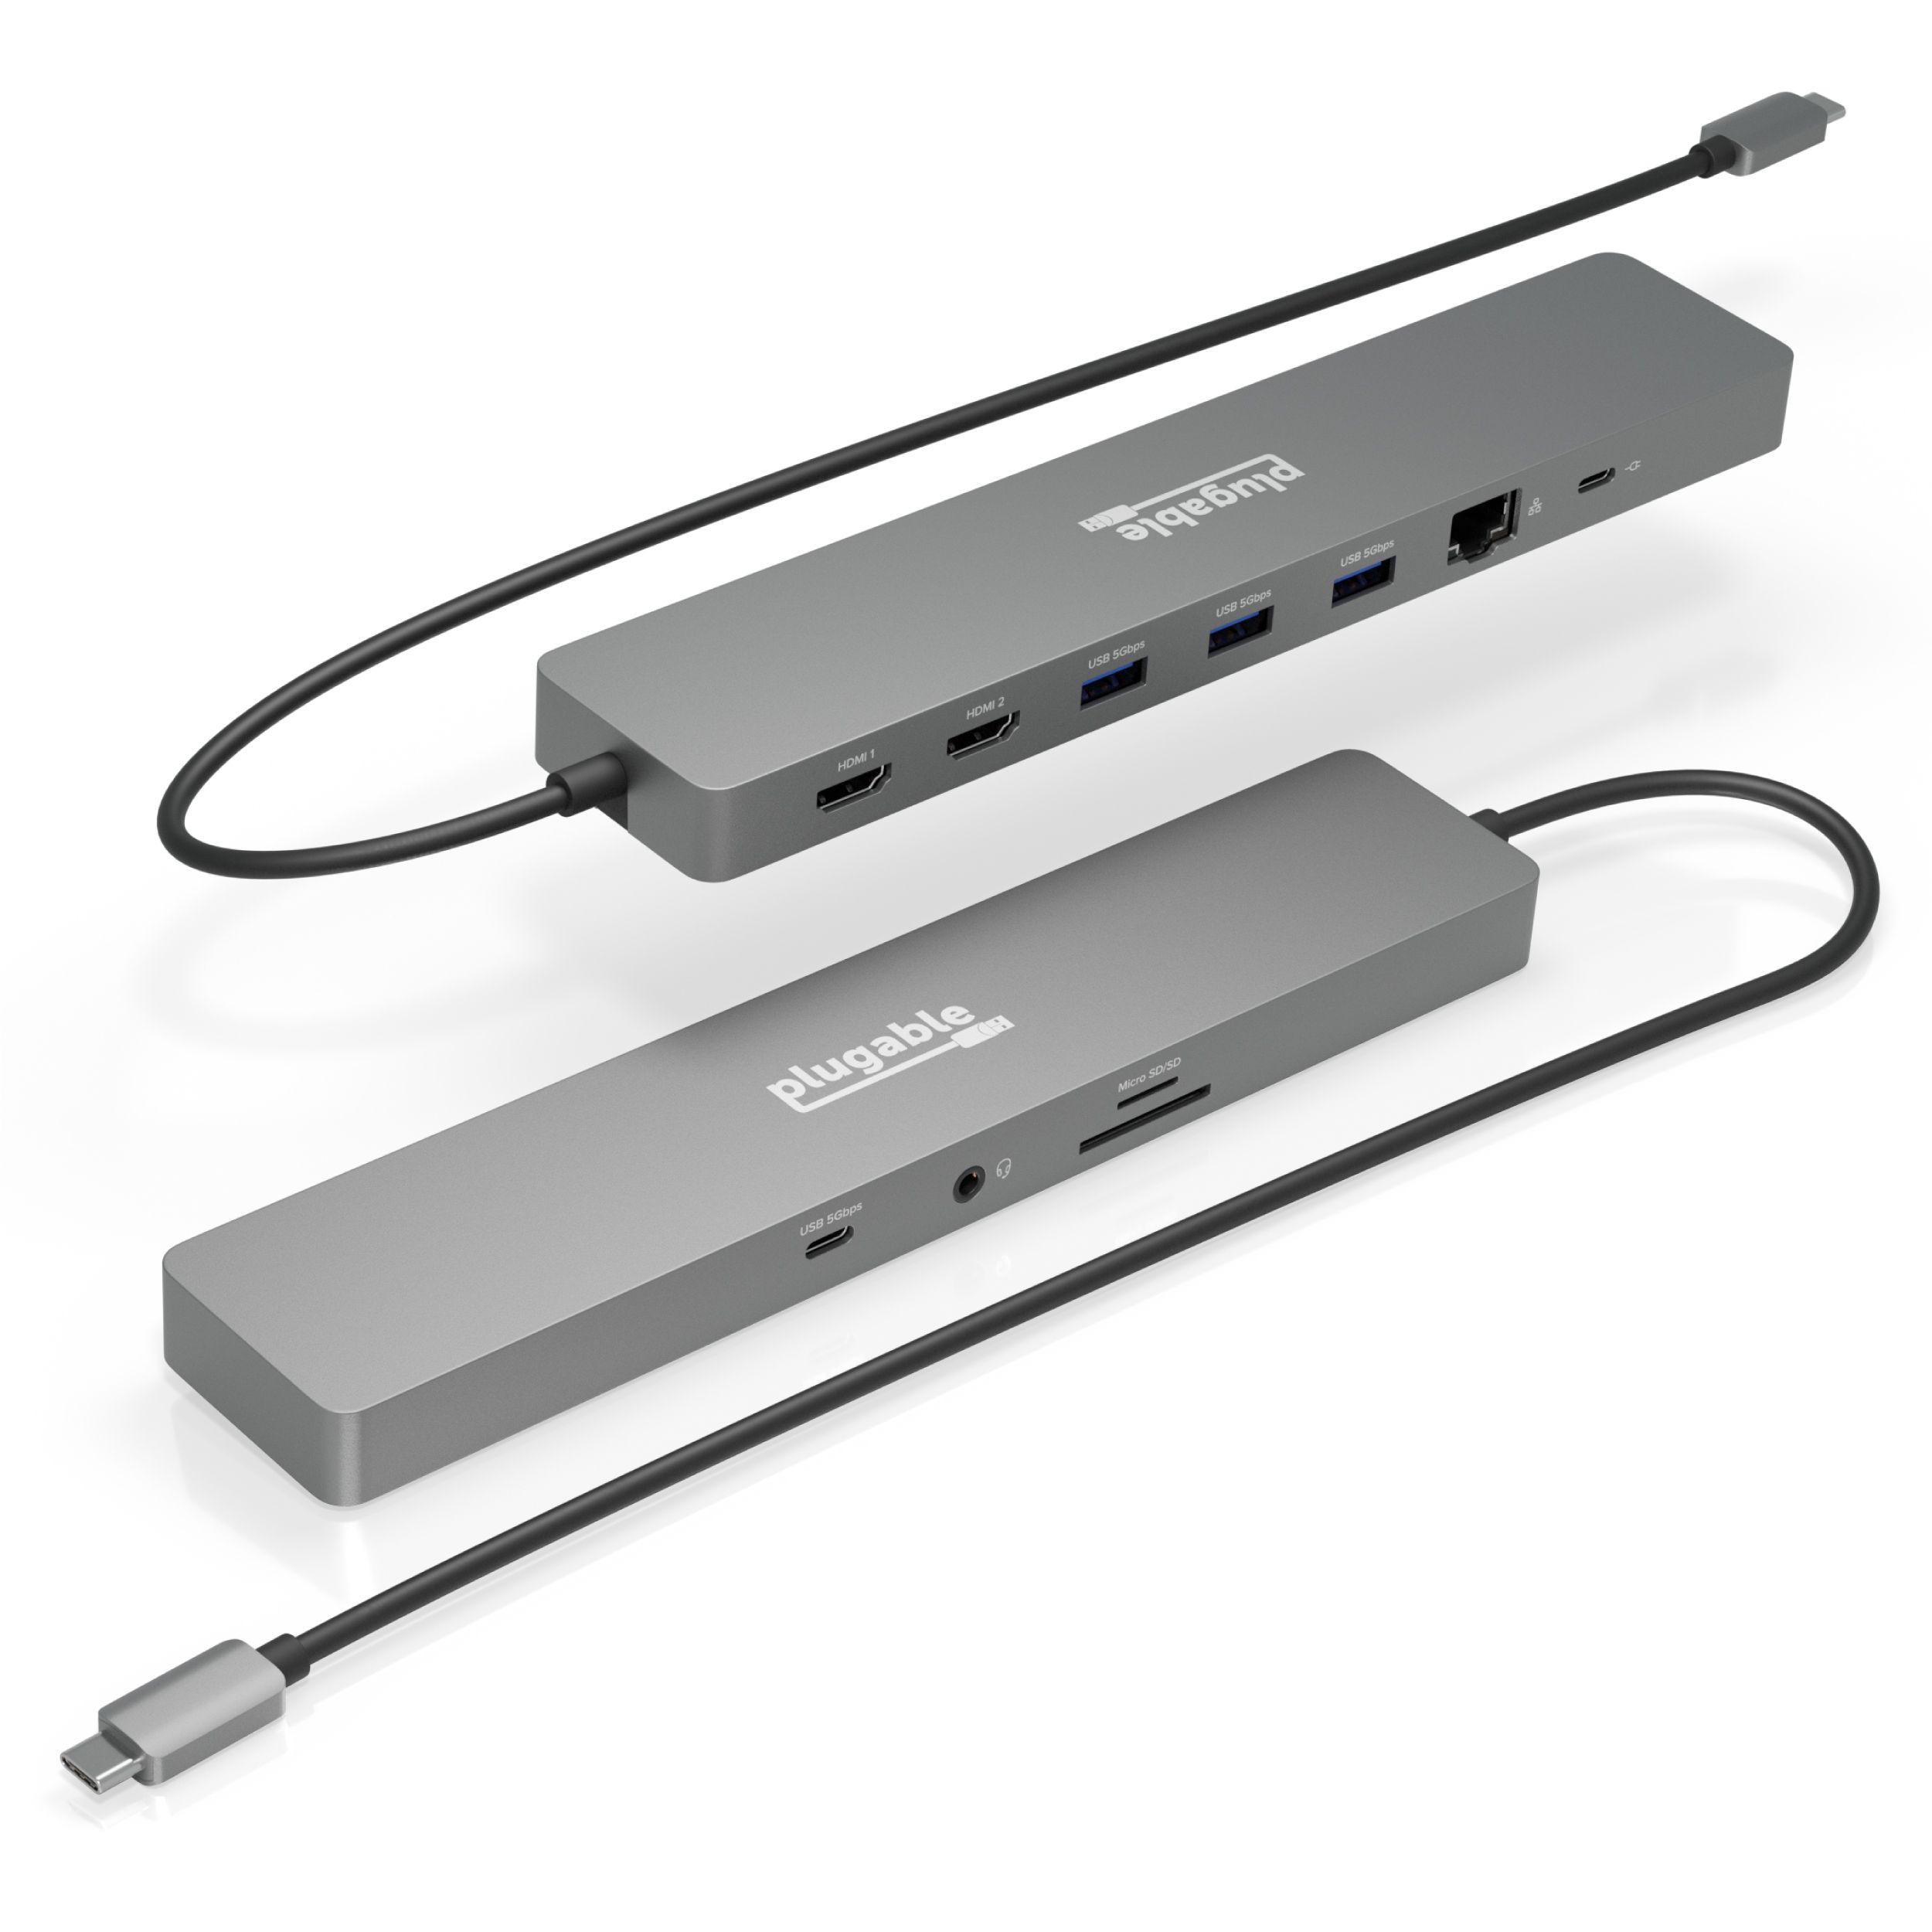 Front and back views of Plugable's USB-C Hub 11